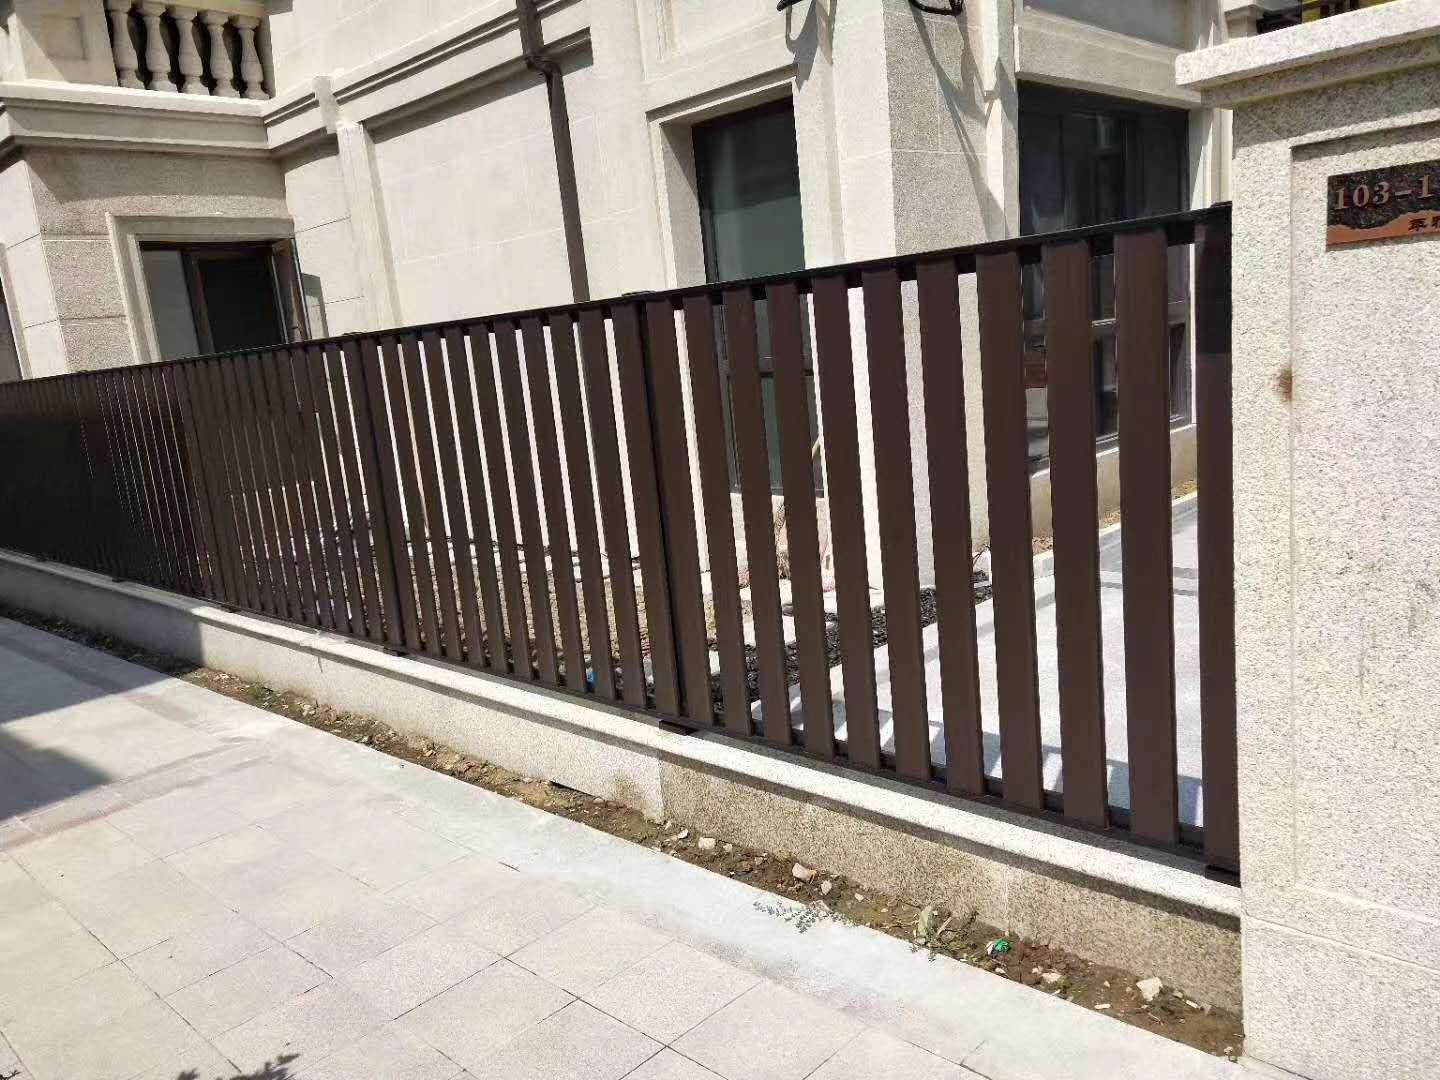 Aluminum Residential Children Protection Fence Metal Fence for Garden or Yard or deck or pool with modern styles